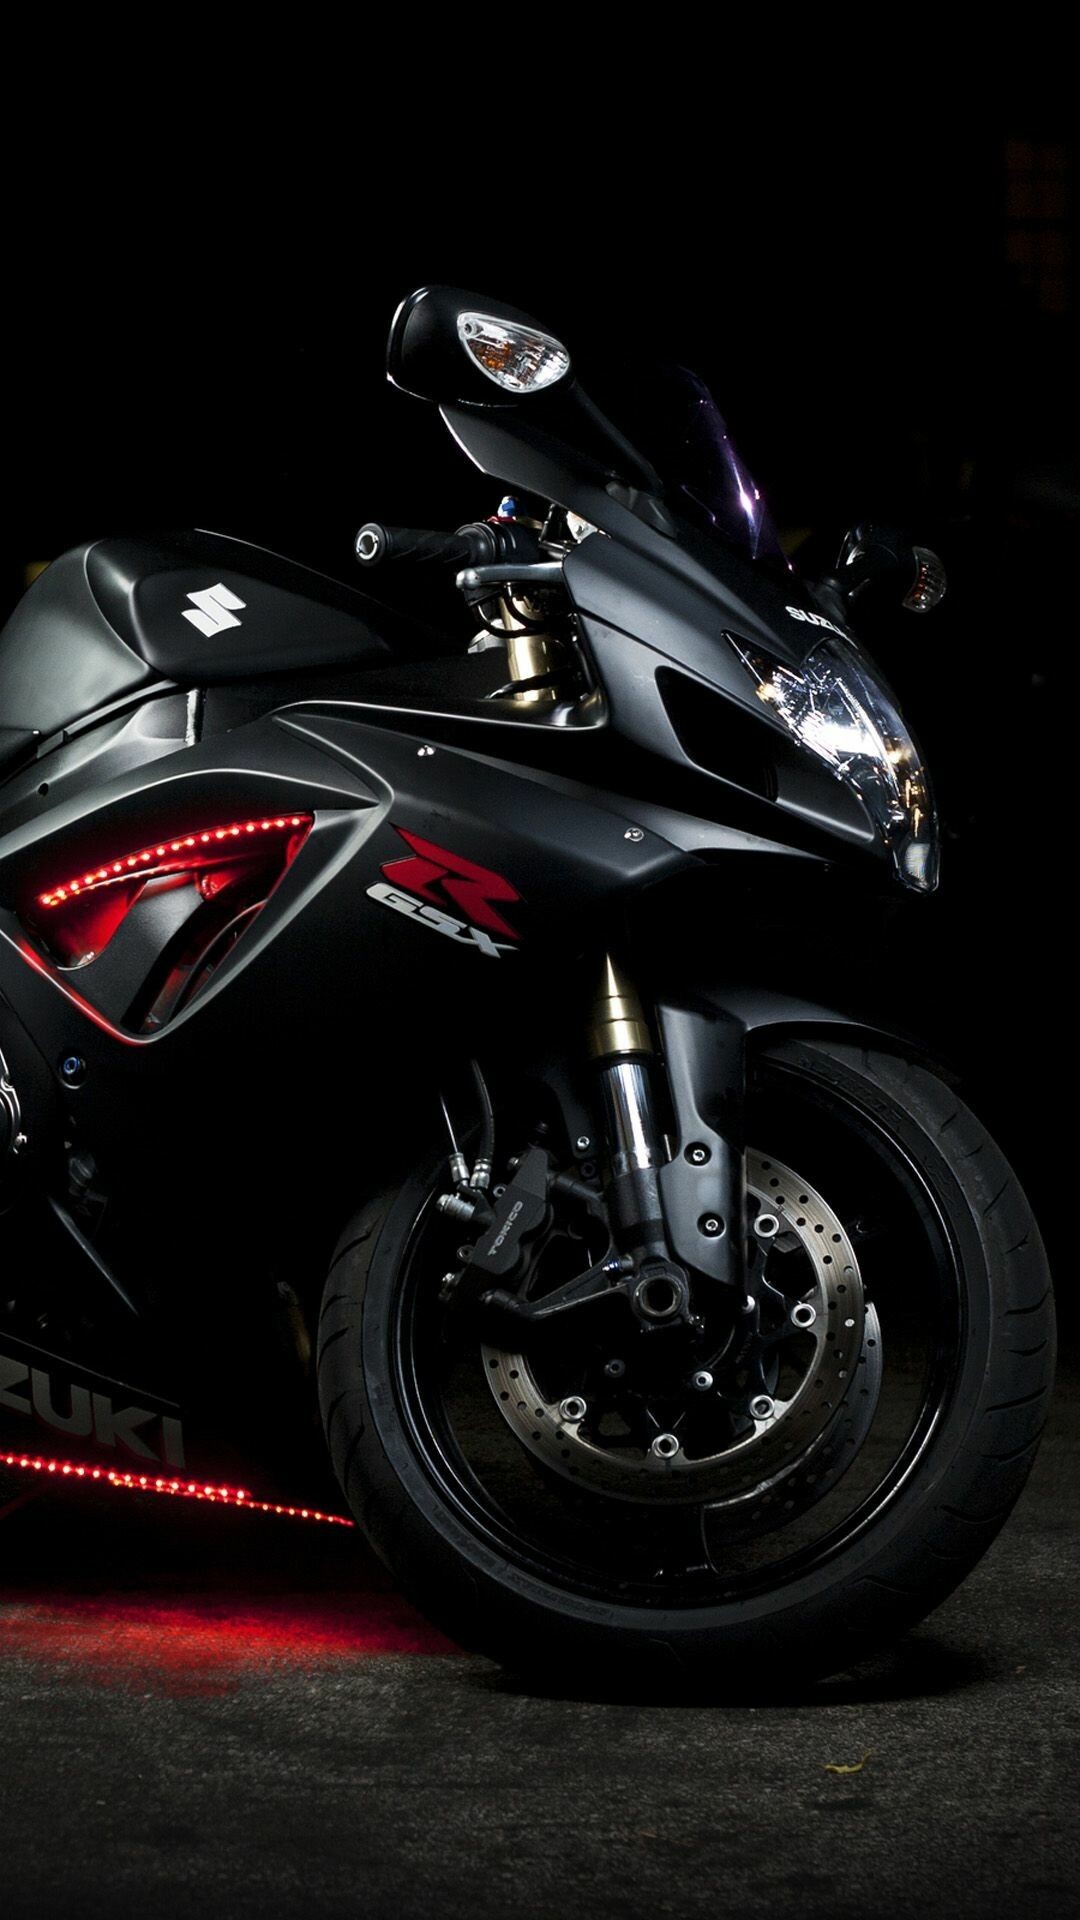 GSX-R: Suzuki, Gixxer 600, Launched with a water-cooled 599 cc (36.6 cu in) inline-4 engine. 1080x1920 Full HD Wallpaper.